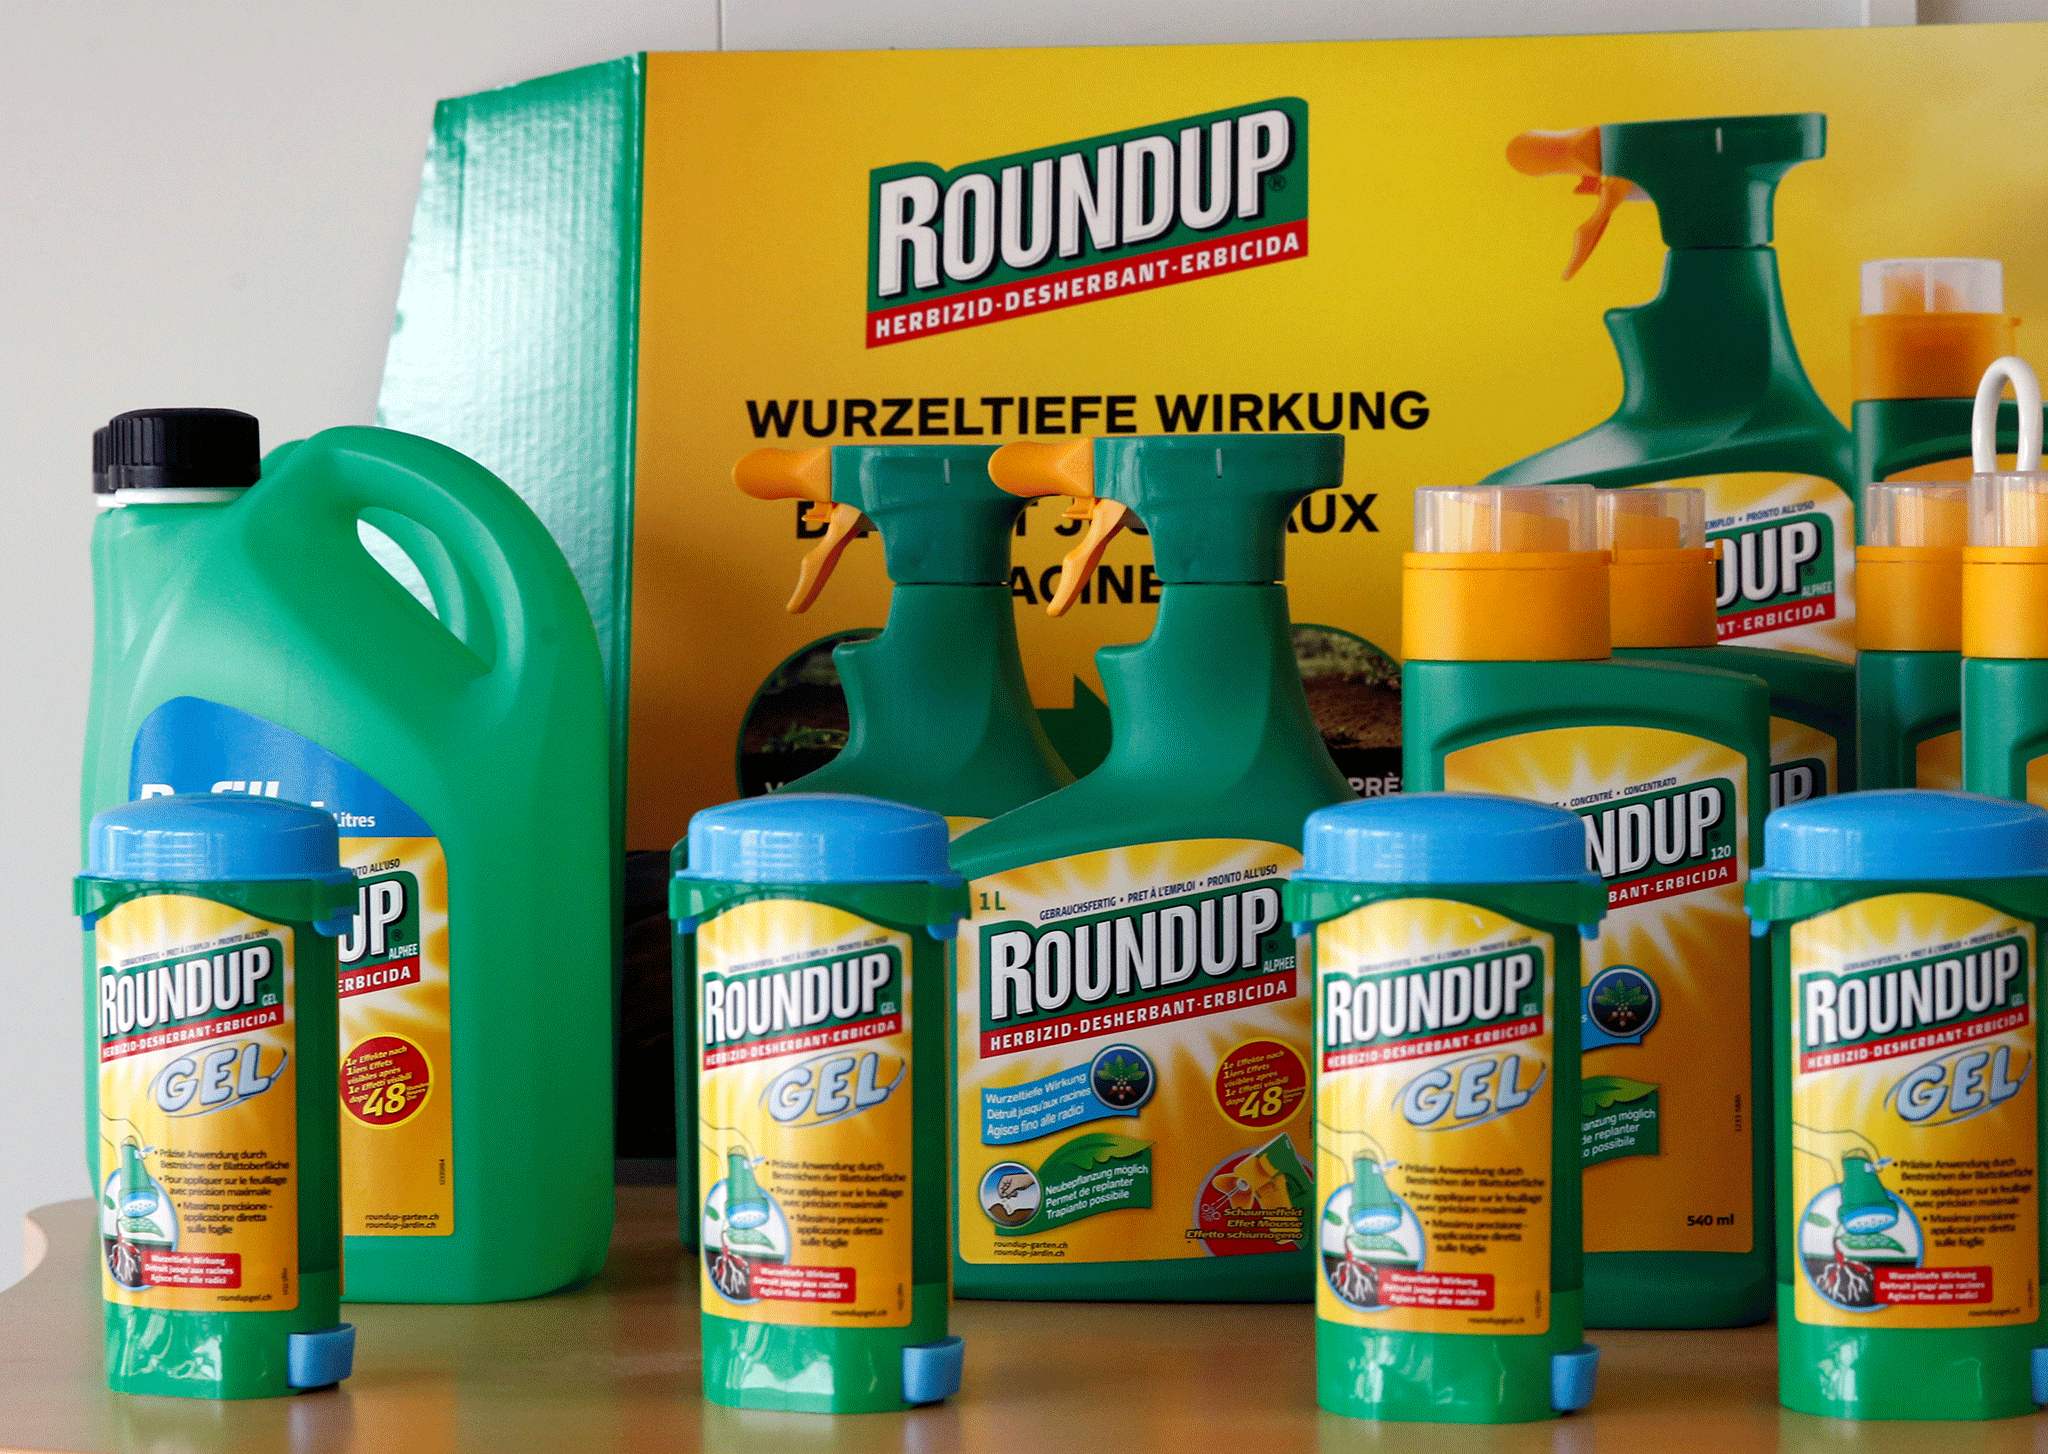 Monsanto's controversial Glyphosate pesticide, Roundup - the firm has patented crops resistant to the chemical